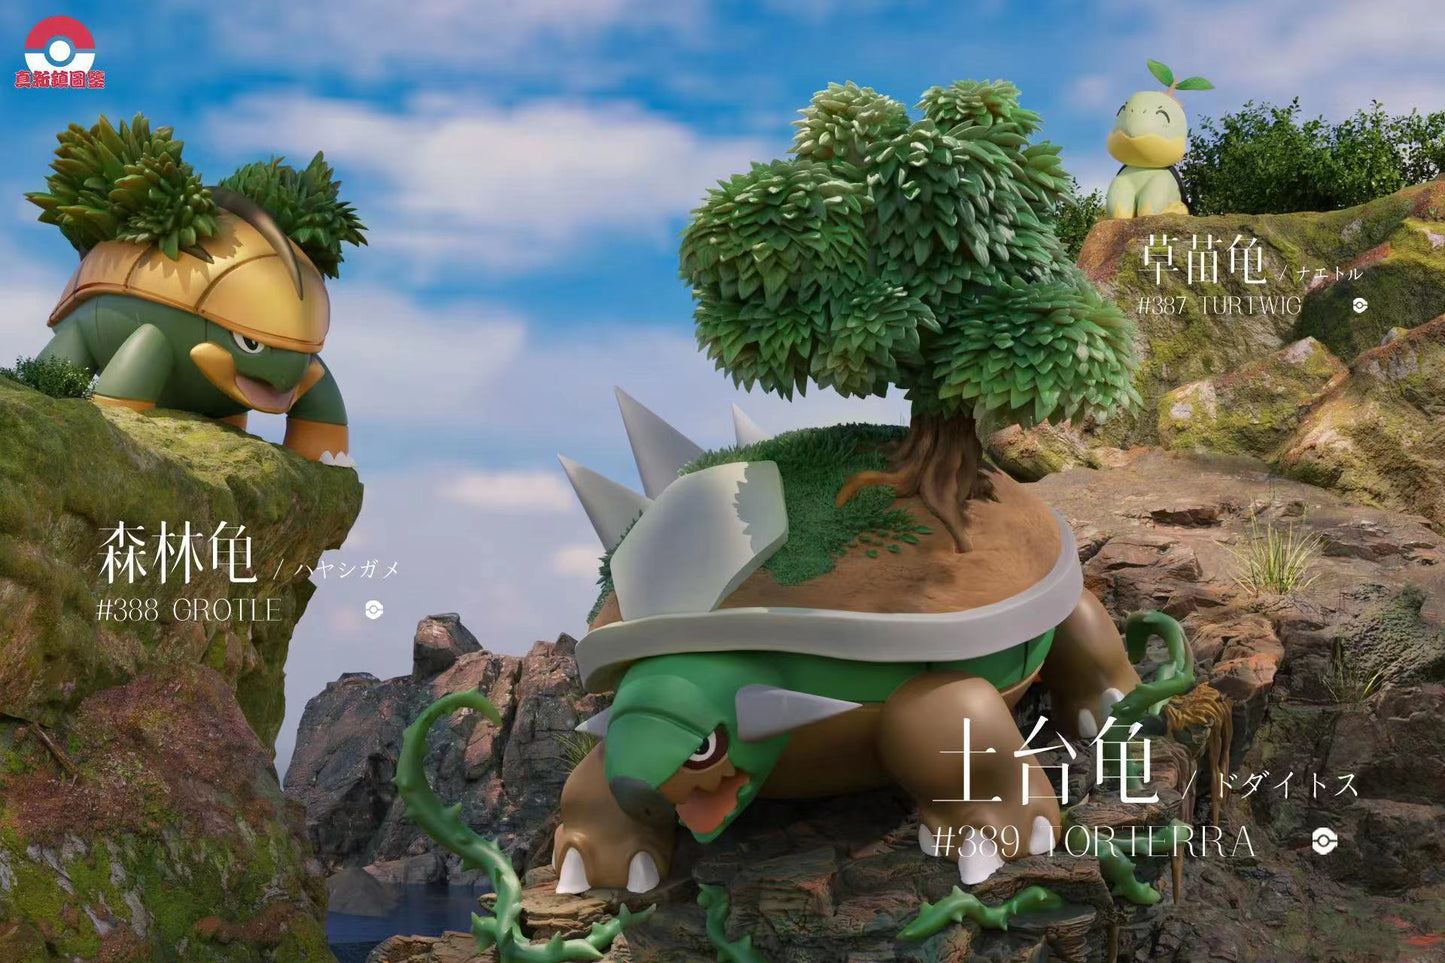 [PREORDER CLOSED] 1/20 Scale World Figure [PALLET TOWN] - Turtwig & Grotle & Torterra